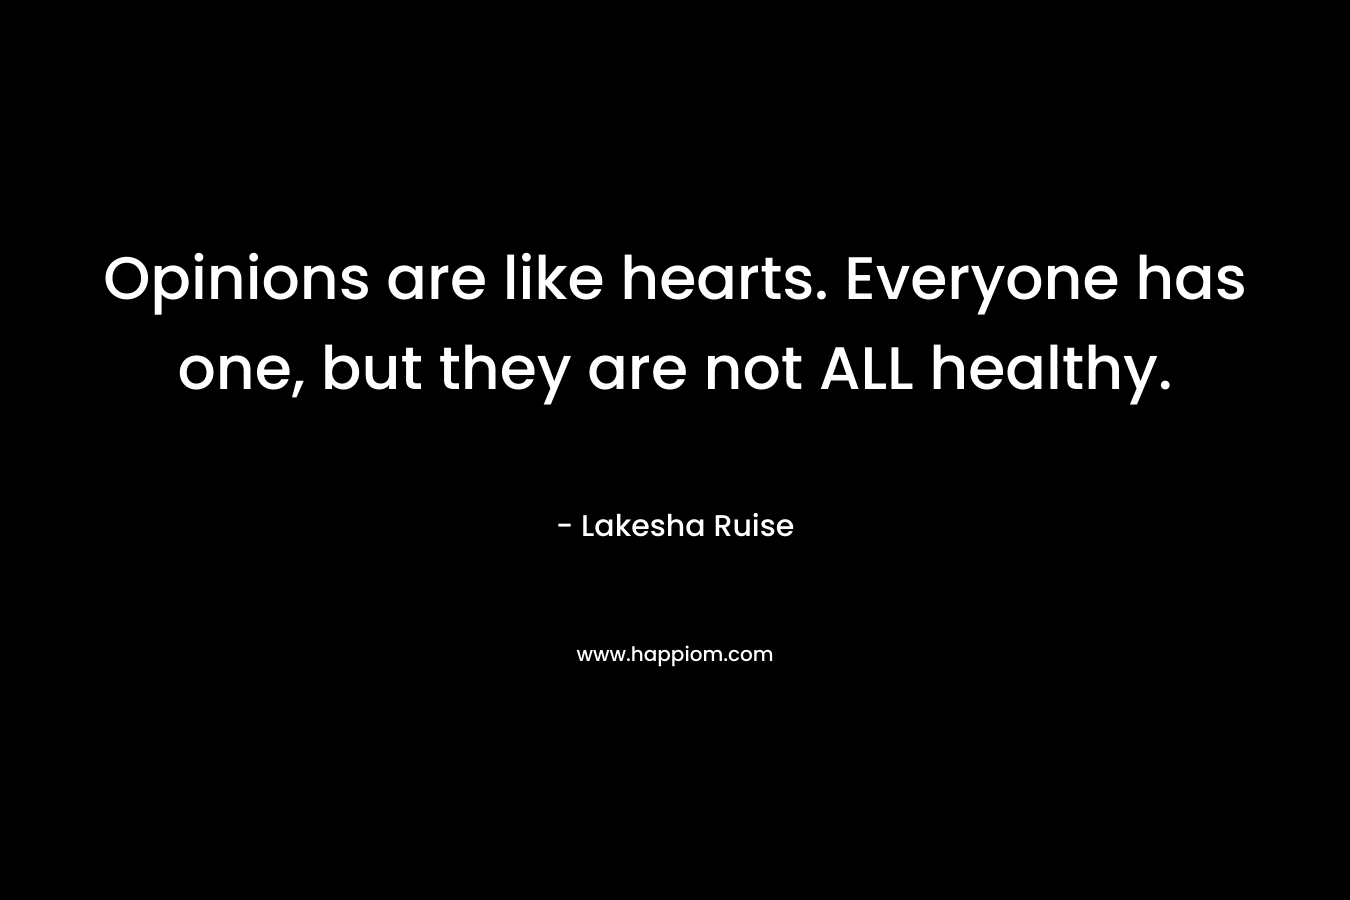 Opinions are like hearts. Everyone has one, but they are not ALL healthy. – Lakesha Ruise